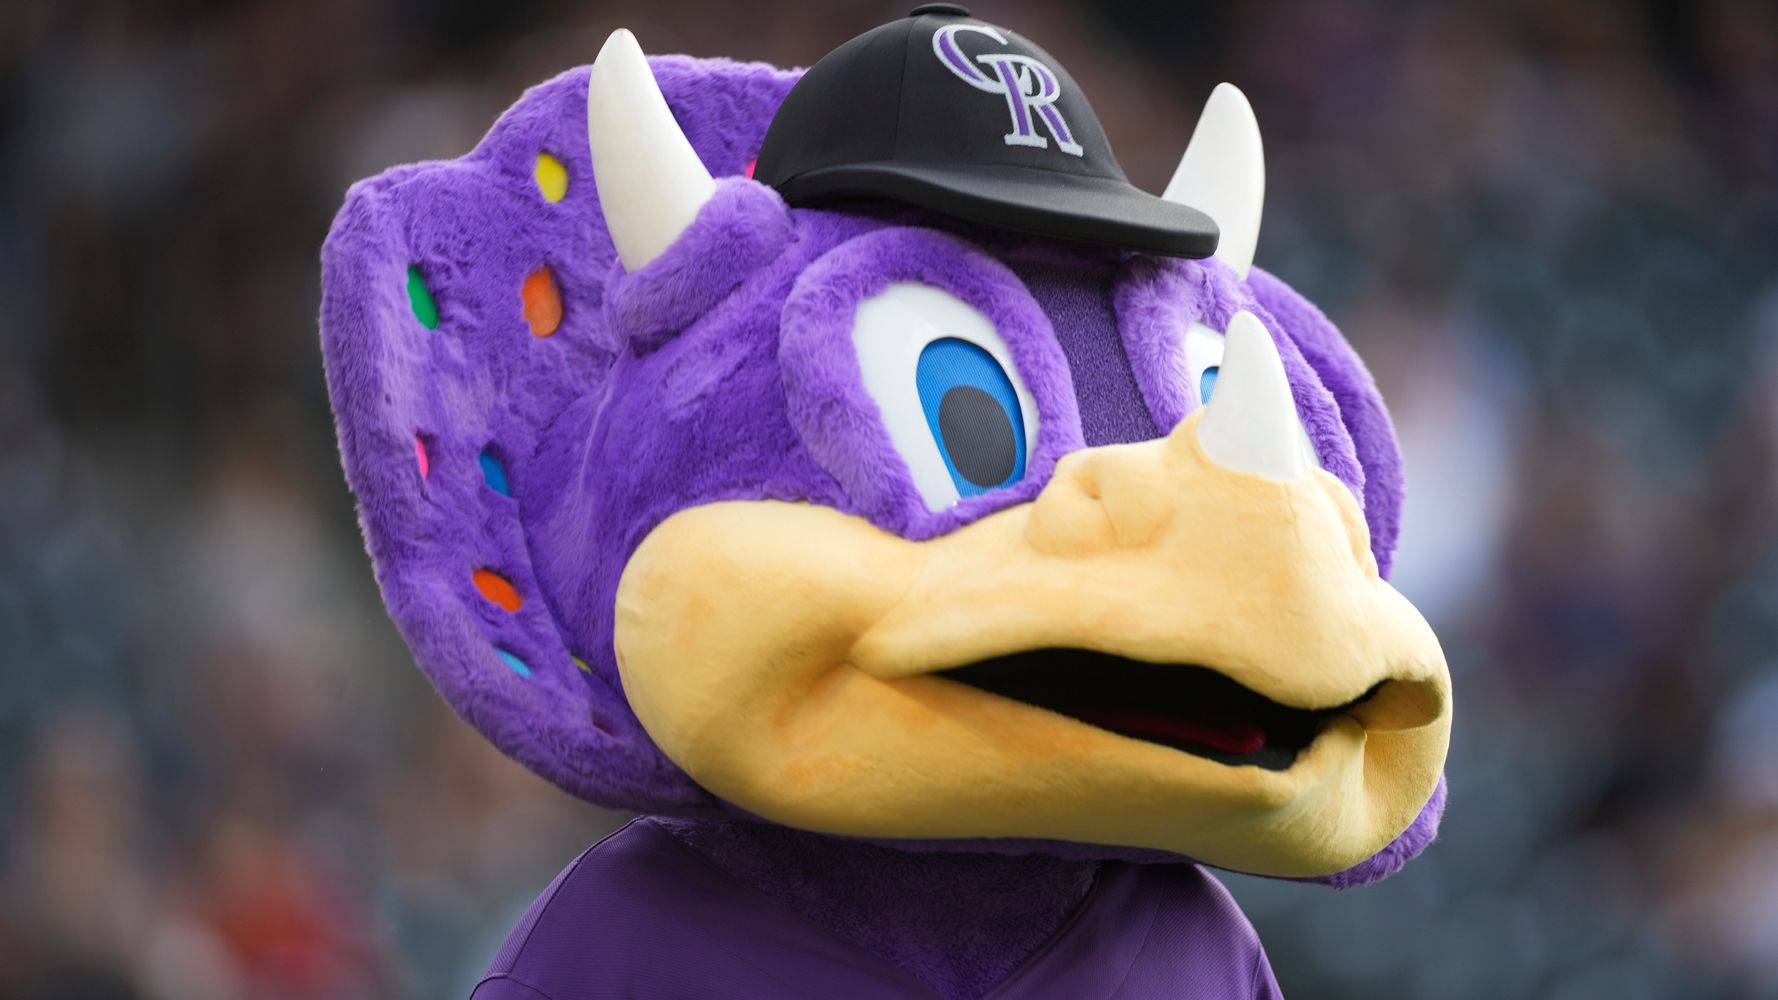 Colorado Rockies mascot Dinger gets tackled by fan